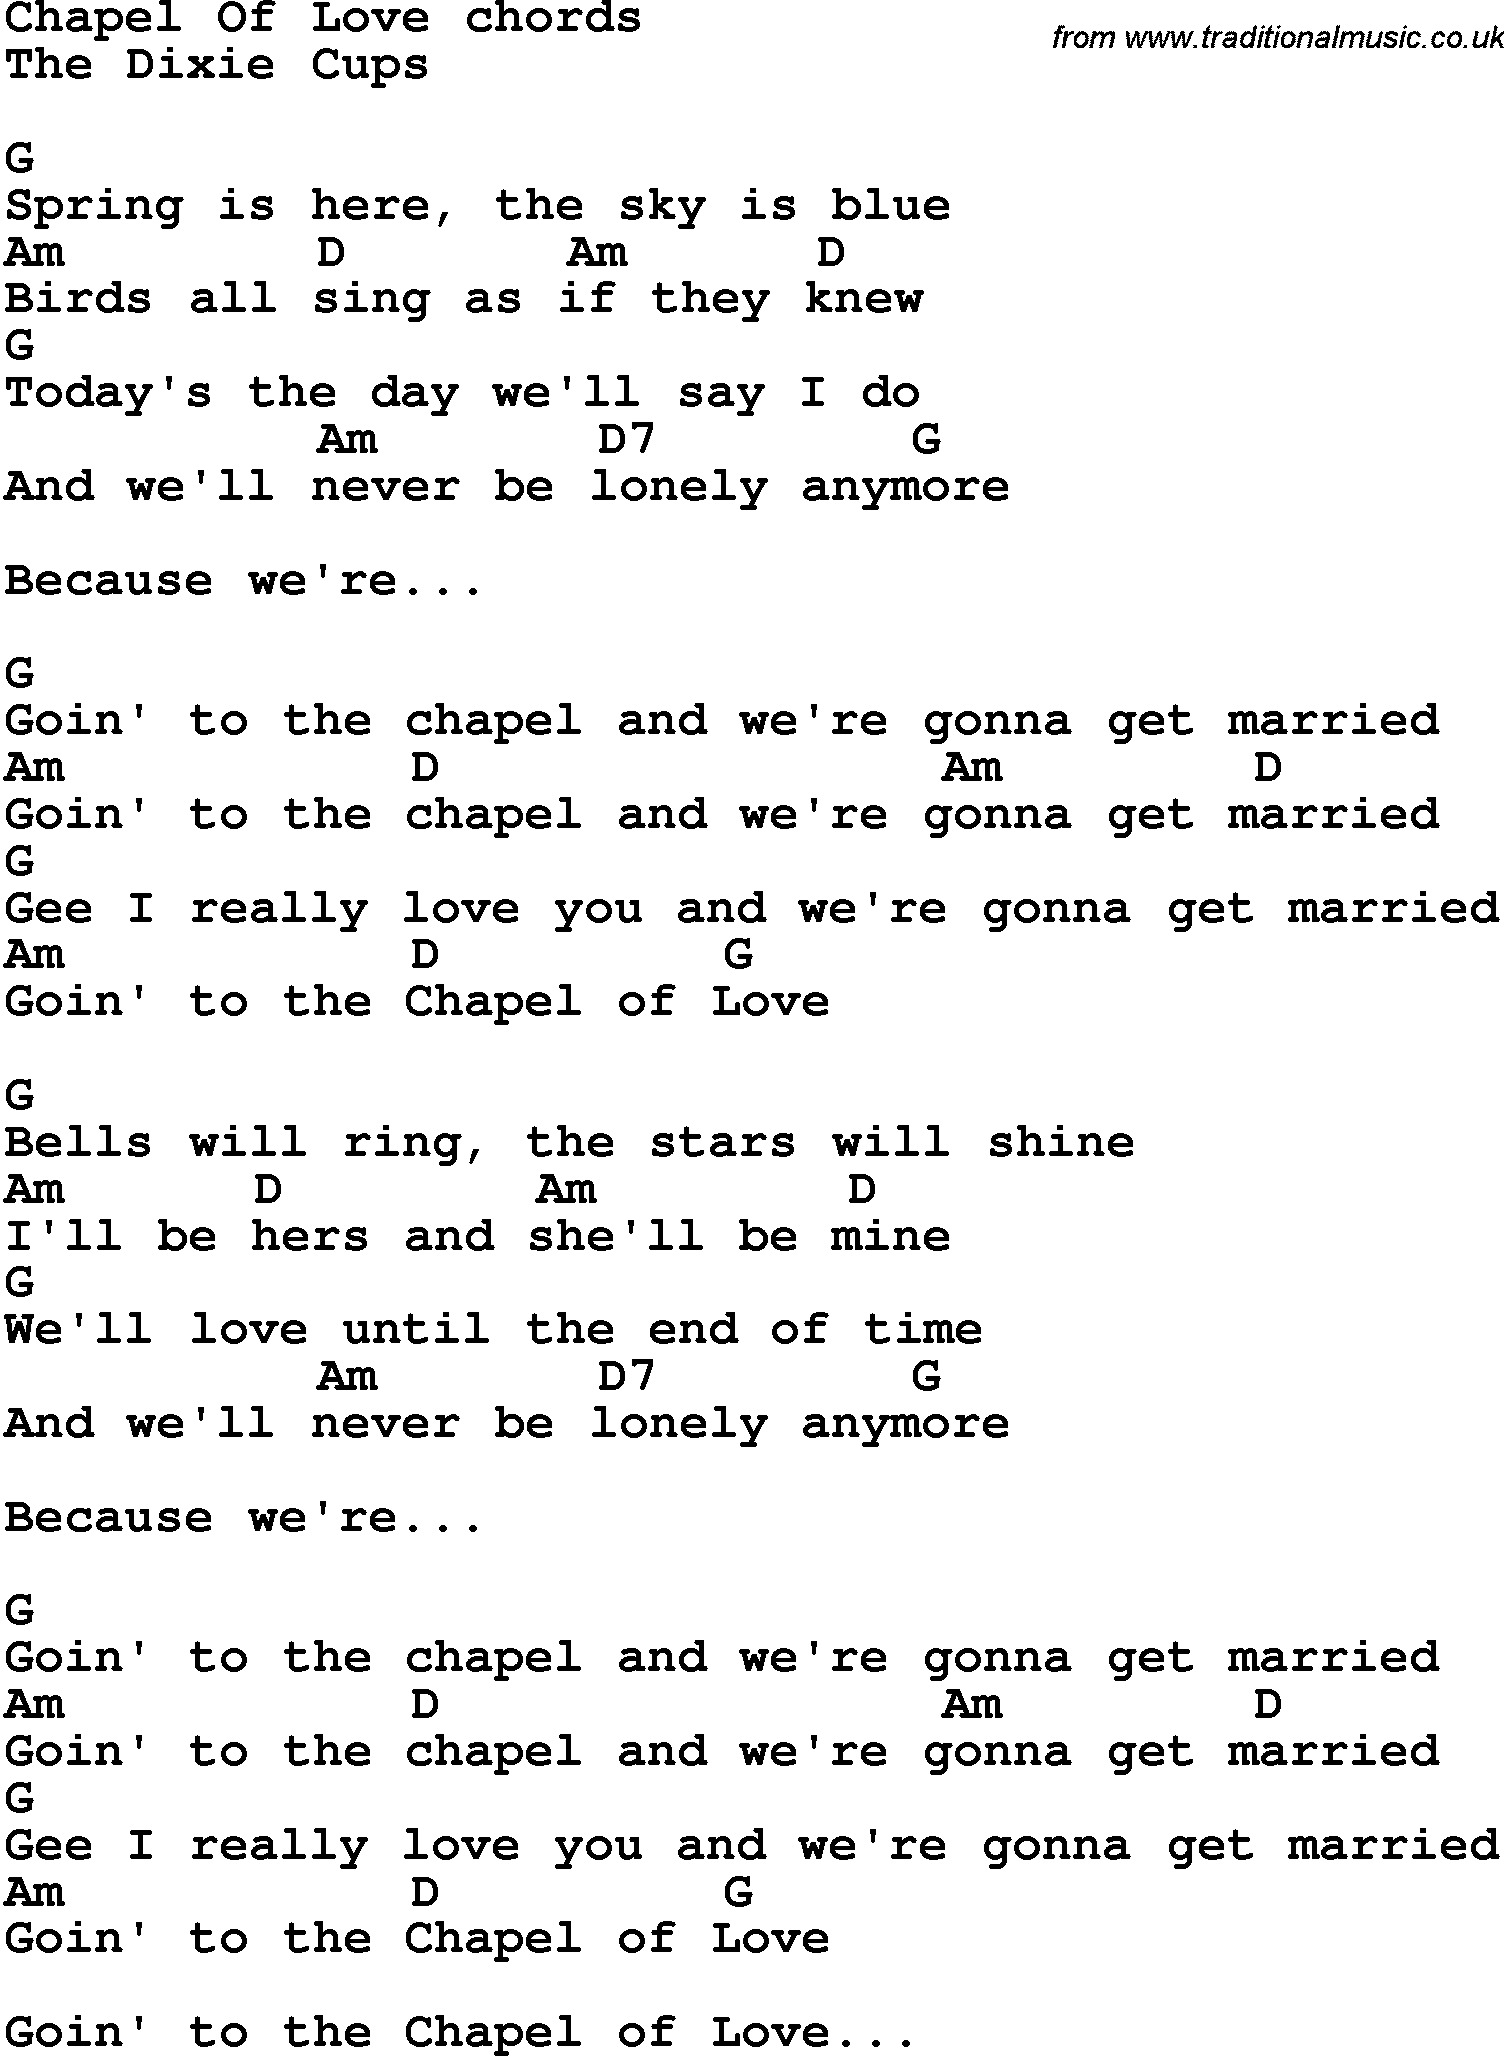 Song Lyrics with guitar chords for Chapel Of Love